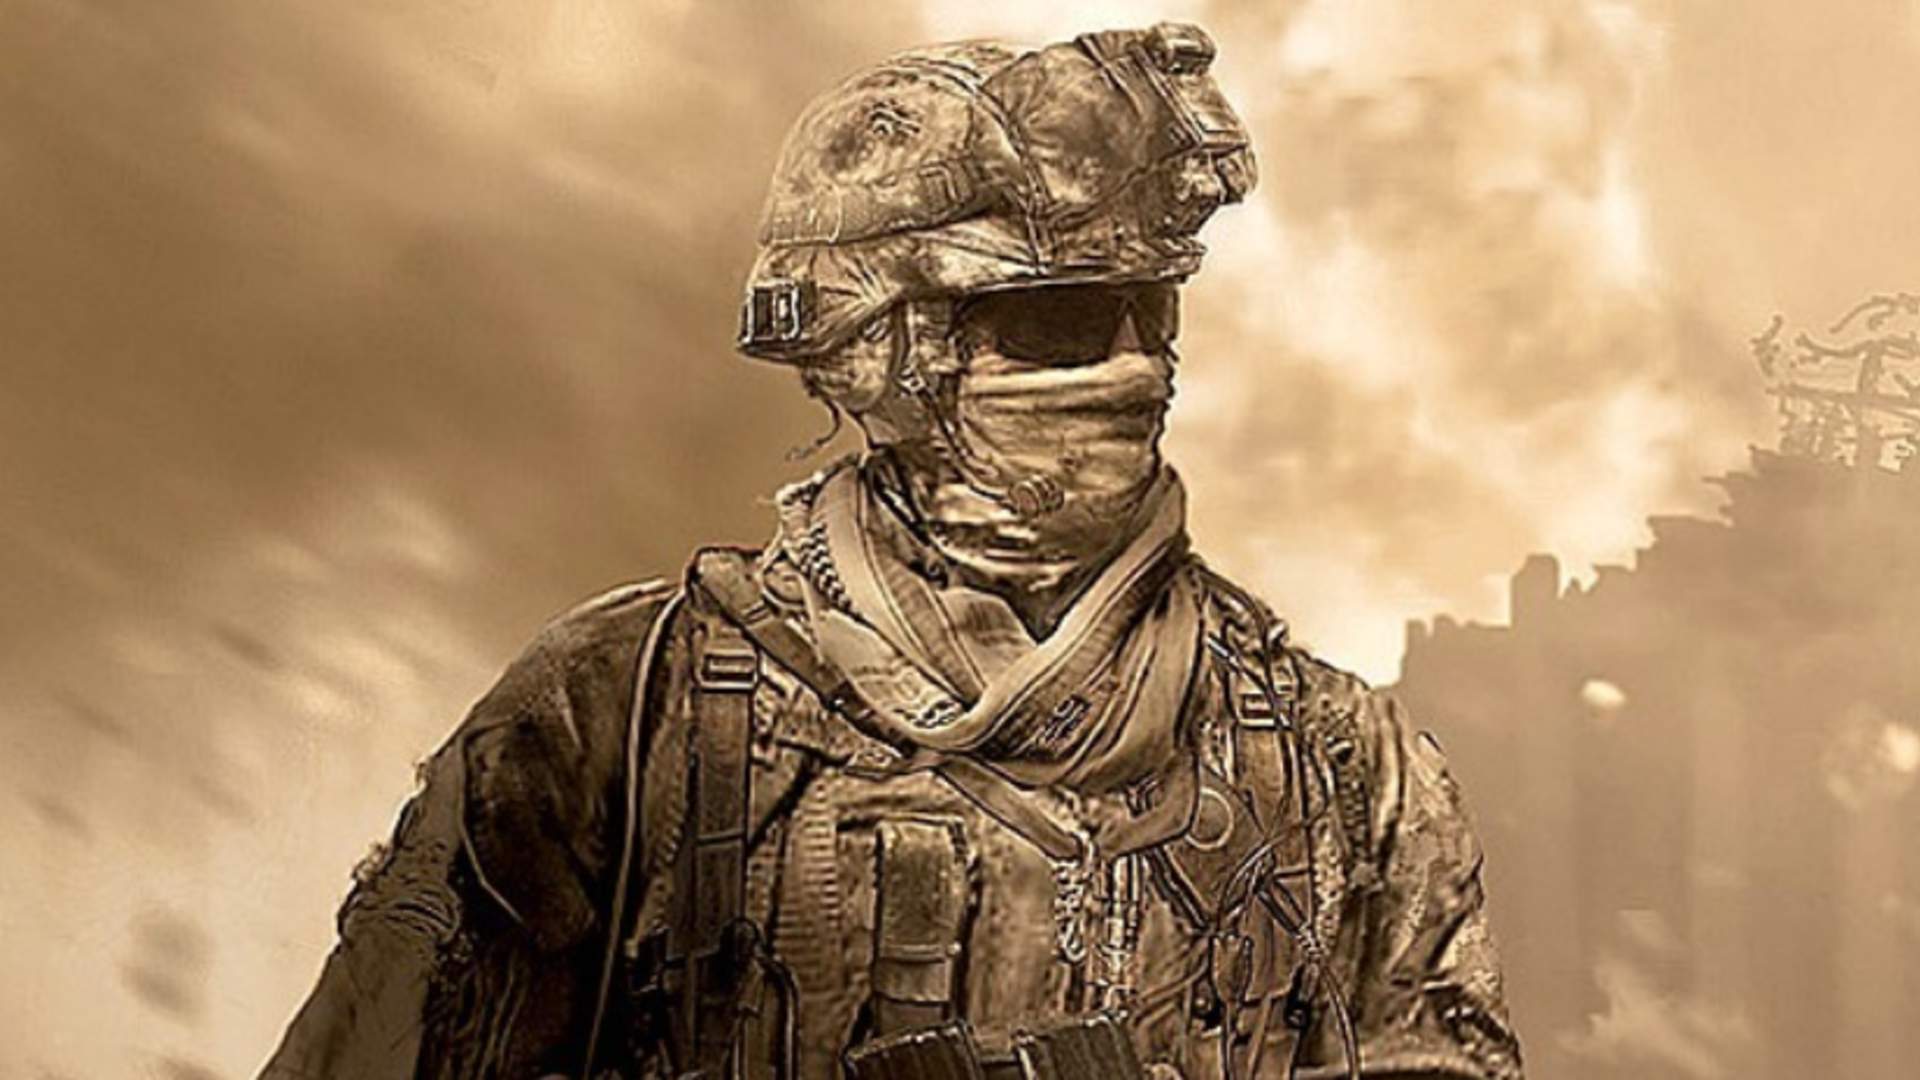 Call of Duty Modern Warfare 2 Remastered Listing Spotted on Amazon